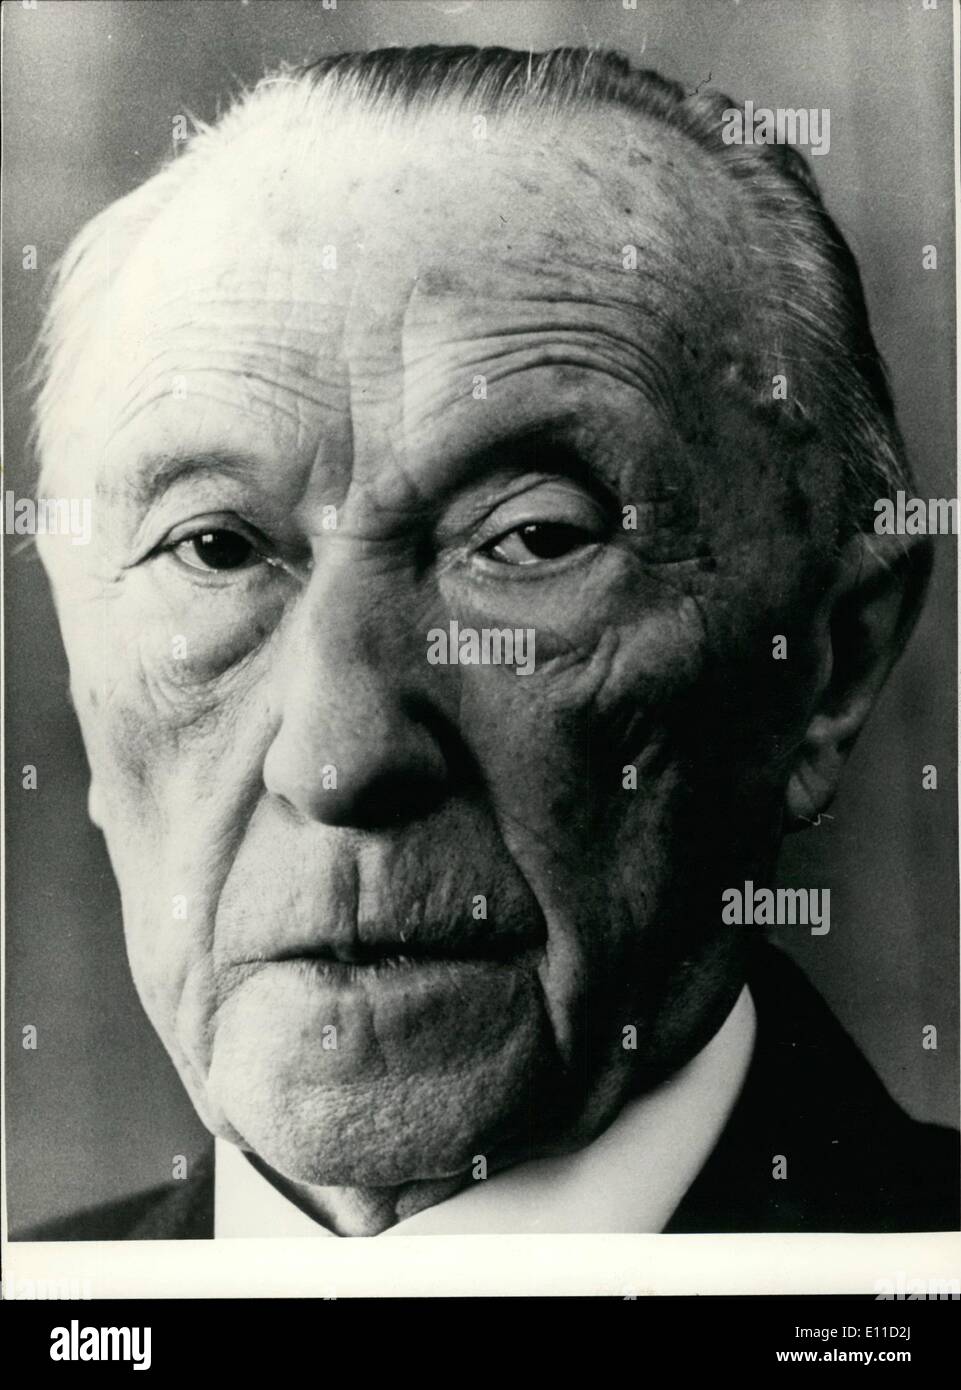 Apr. 04, 1977 - Adenauer wan born at cologne, he has been a lawyer. In 1917 he became Lord mayor of cologne. 1933 he had to retire from all his offices. After the second world war in 1945 he was one of the founders of the chriotlich Demokratische union, 1946 he became ohairman of this party in Nordrhein-Westfalen and in 1949 ho was chosen to the &deg;airman of the CDD. At tho acme year Adonauer became the first chancellor of the poderal Ropublio of Germany (till 1963). prom 1951 till 1955 he hao boon Stock Photo